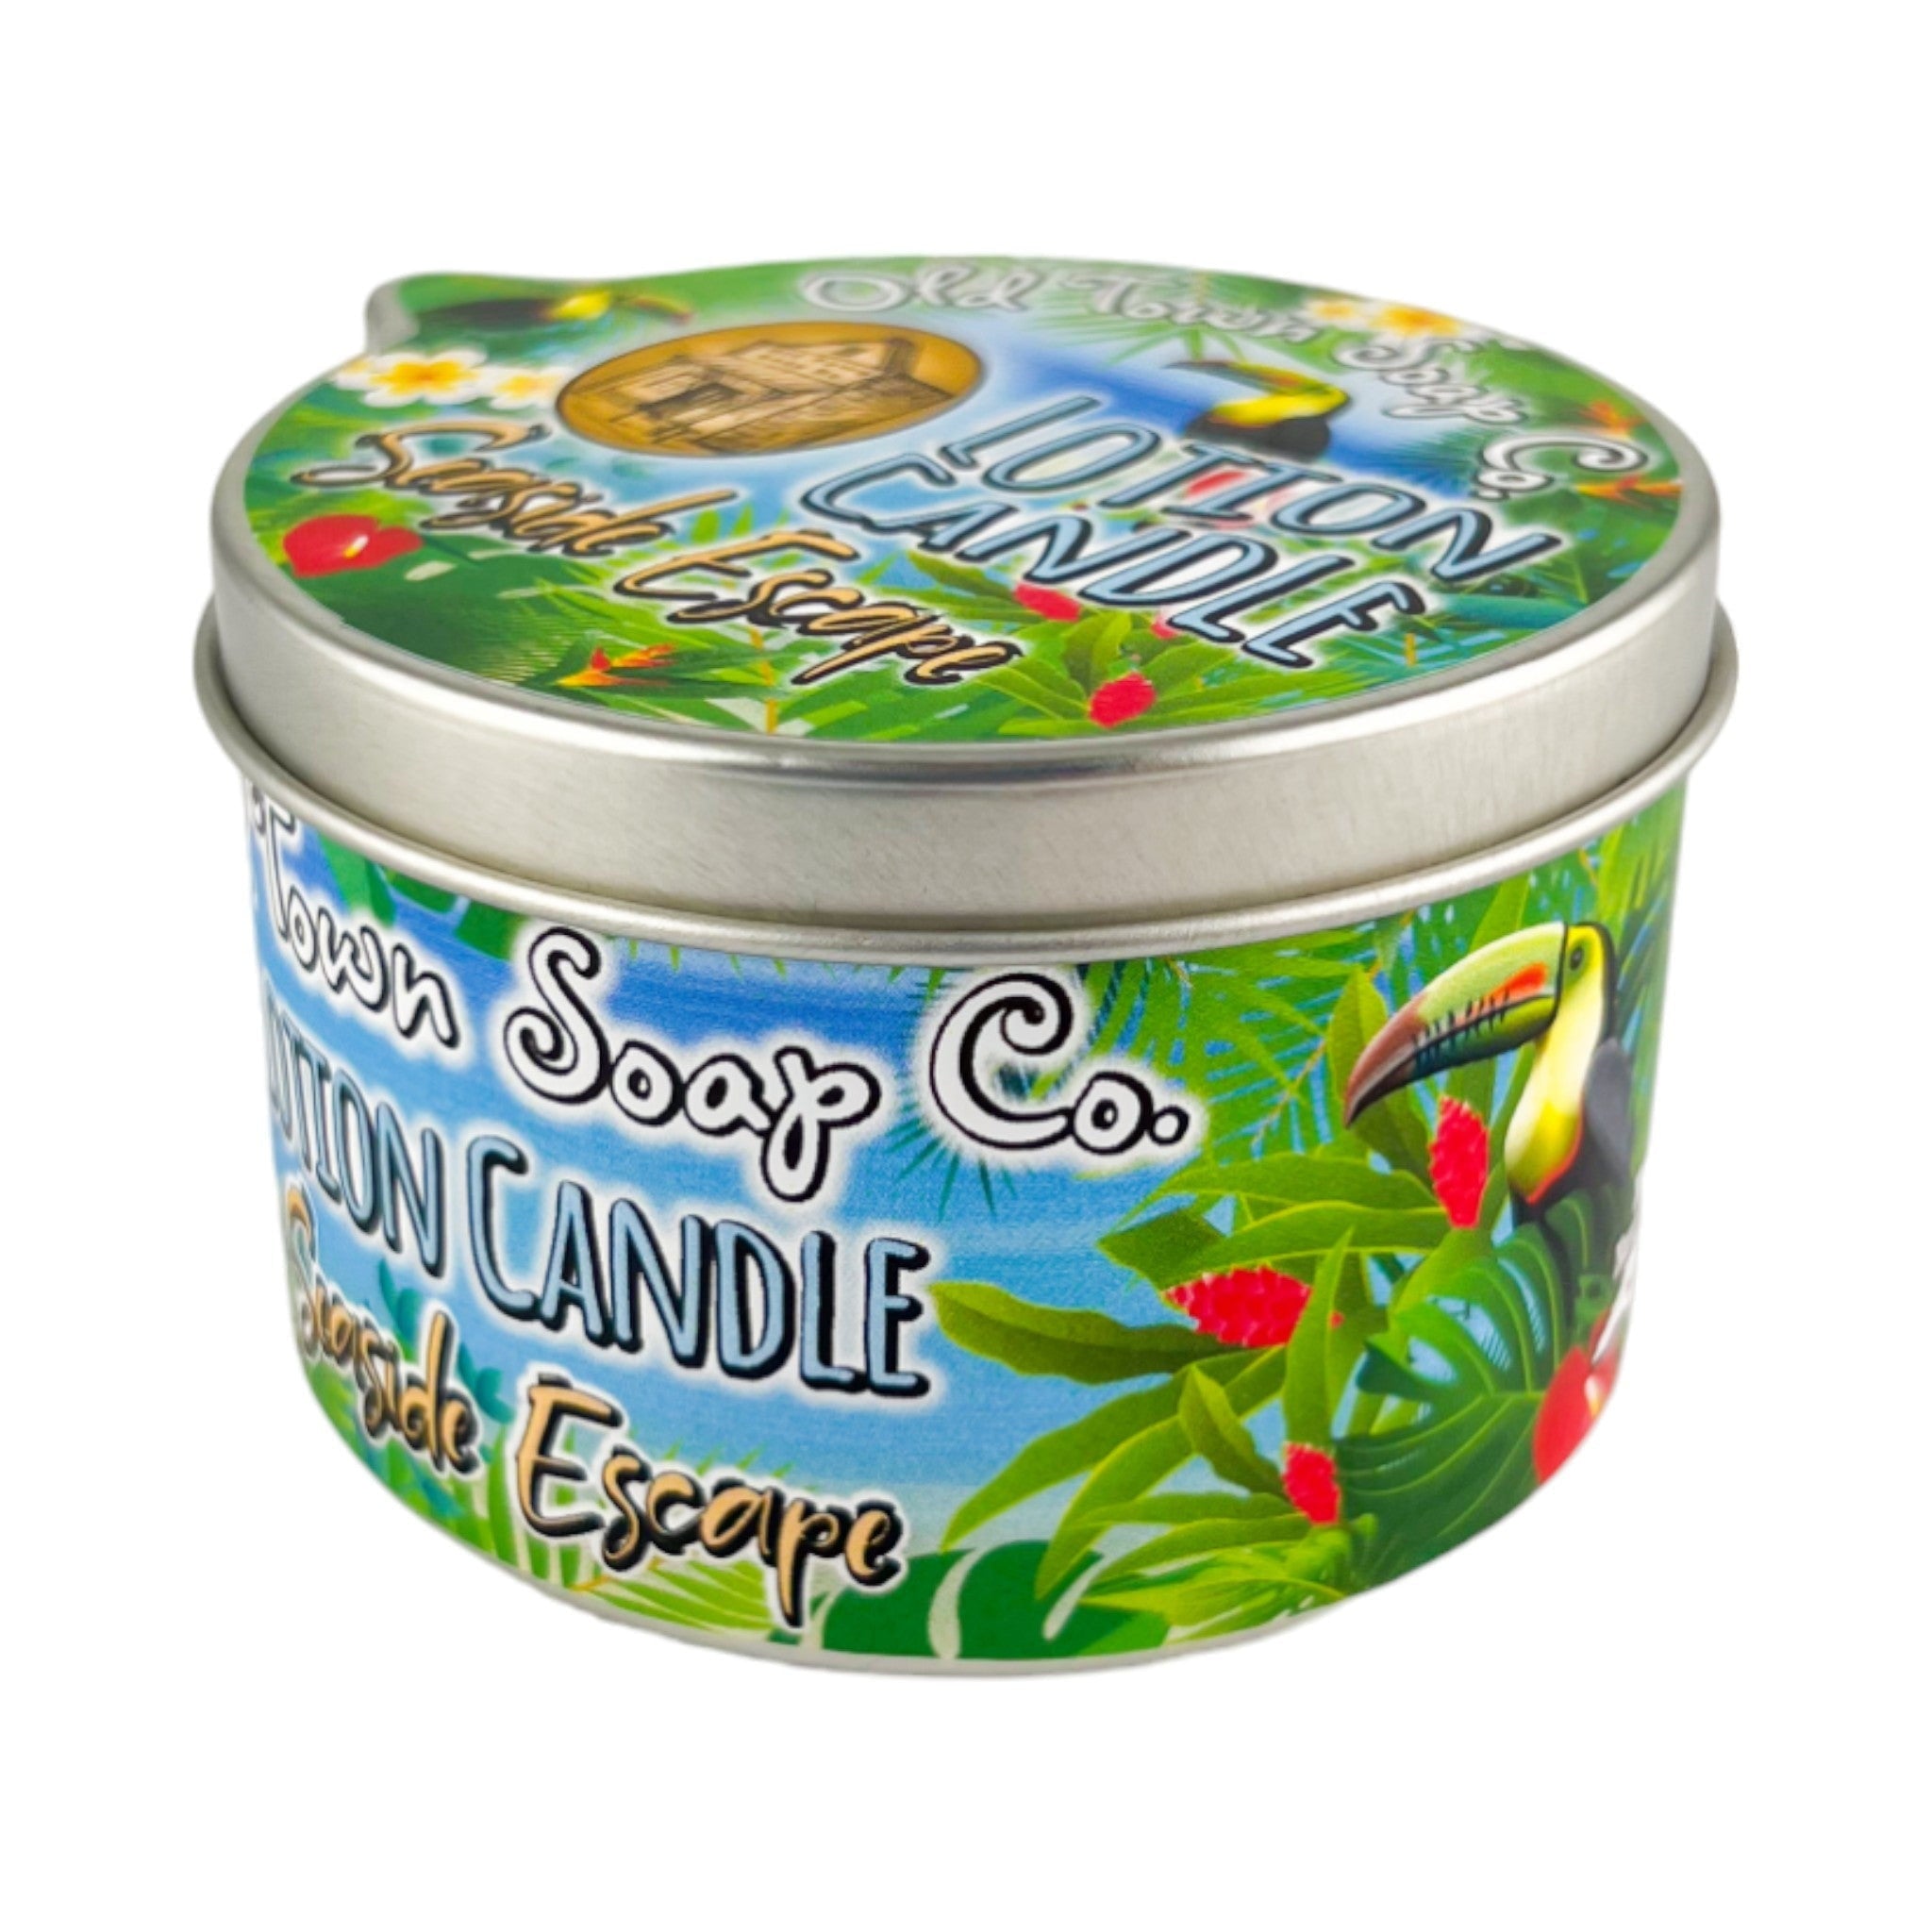 Seaside Escape -Lotion Candles - Old Town Soap Co.